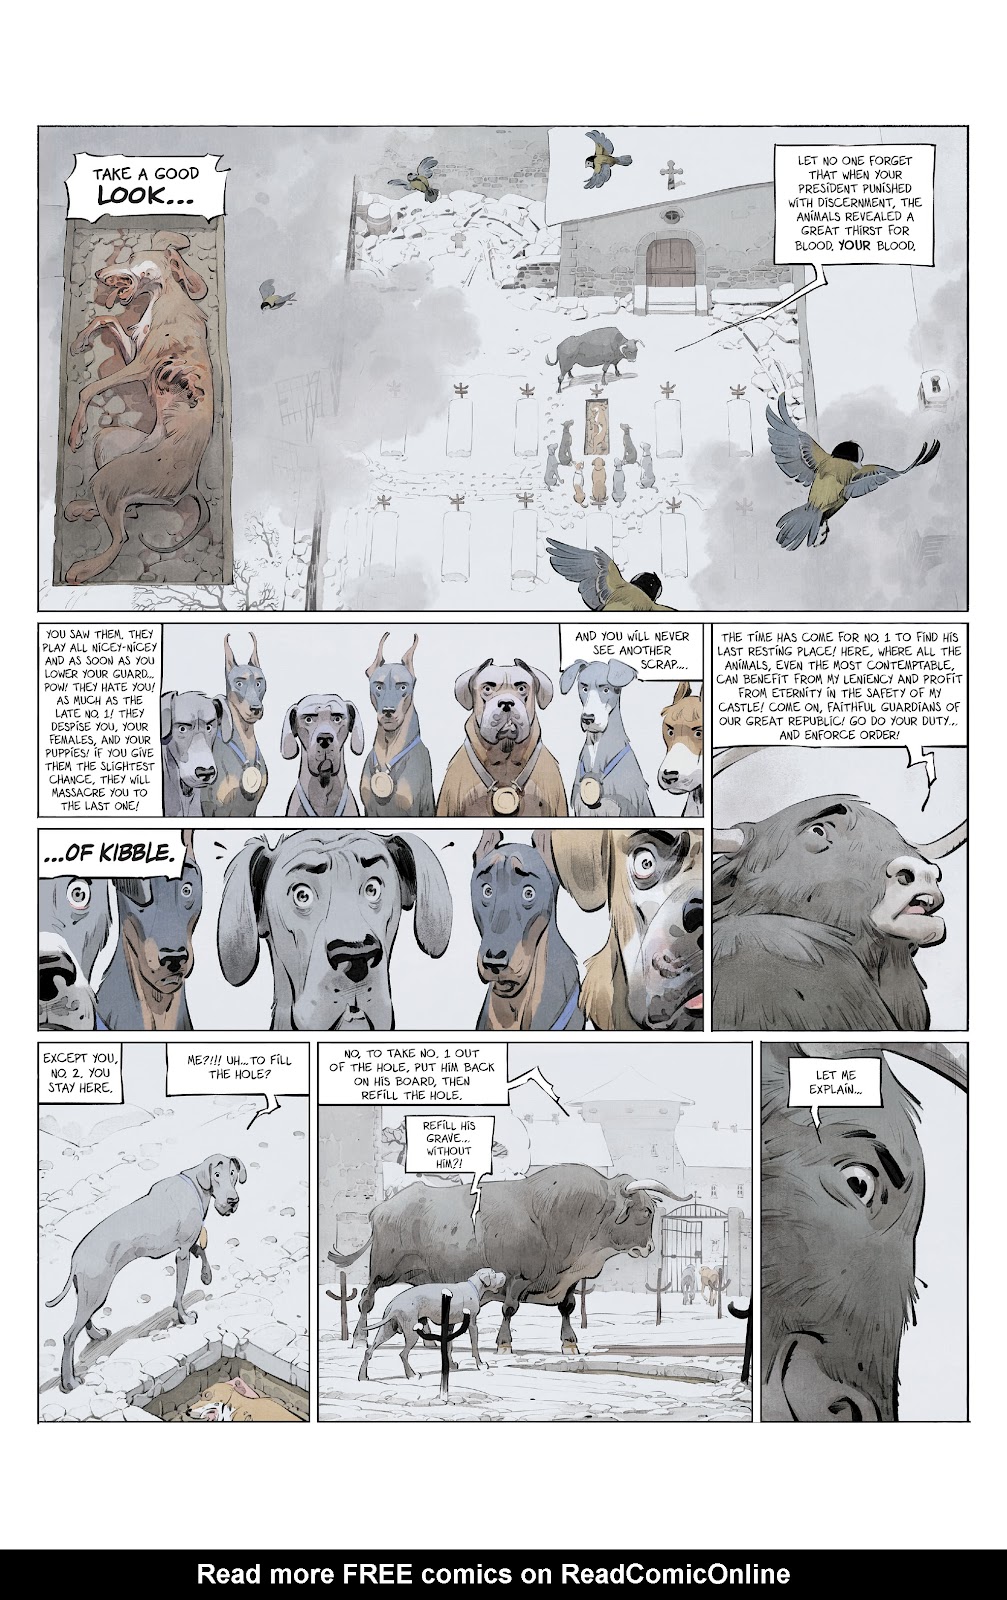 Animal Castle Vol. 2 issue 1 - Page 7